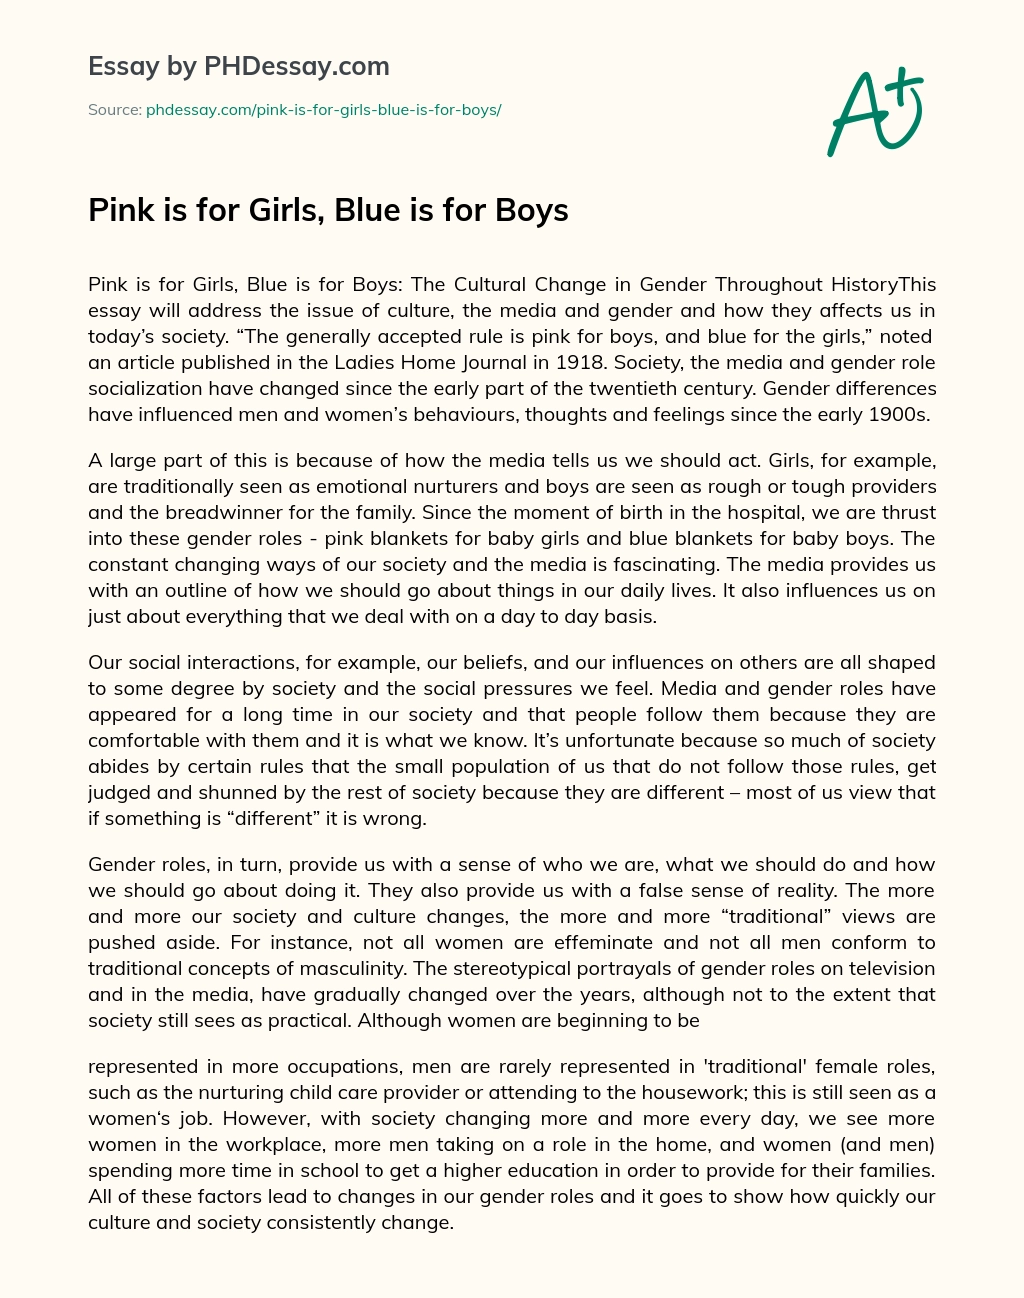 Pink is for Girls, Blue is for Boys essay